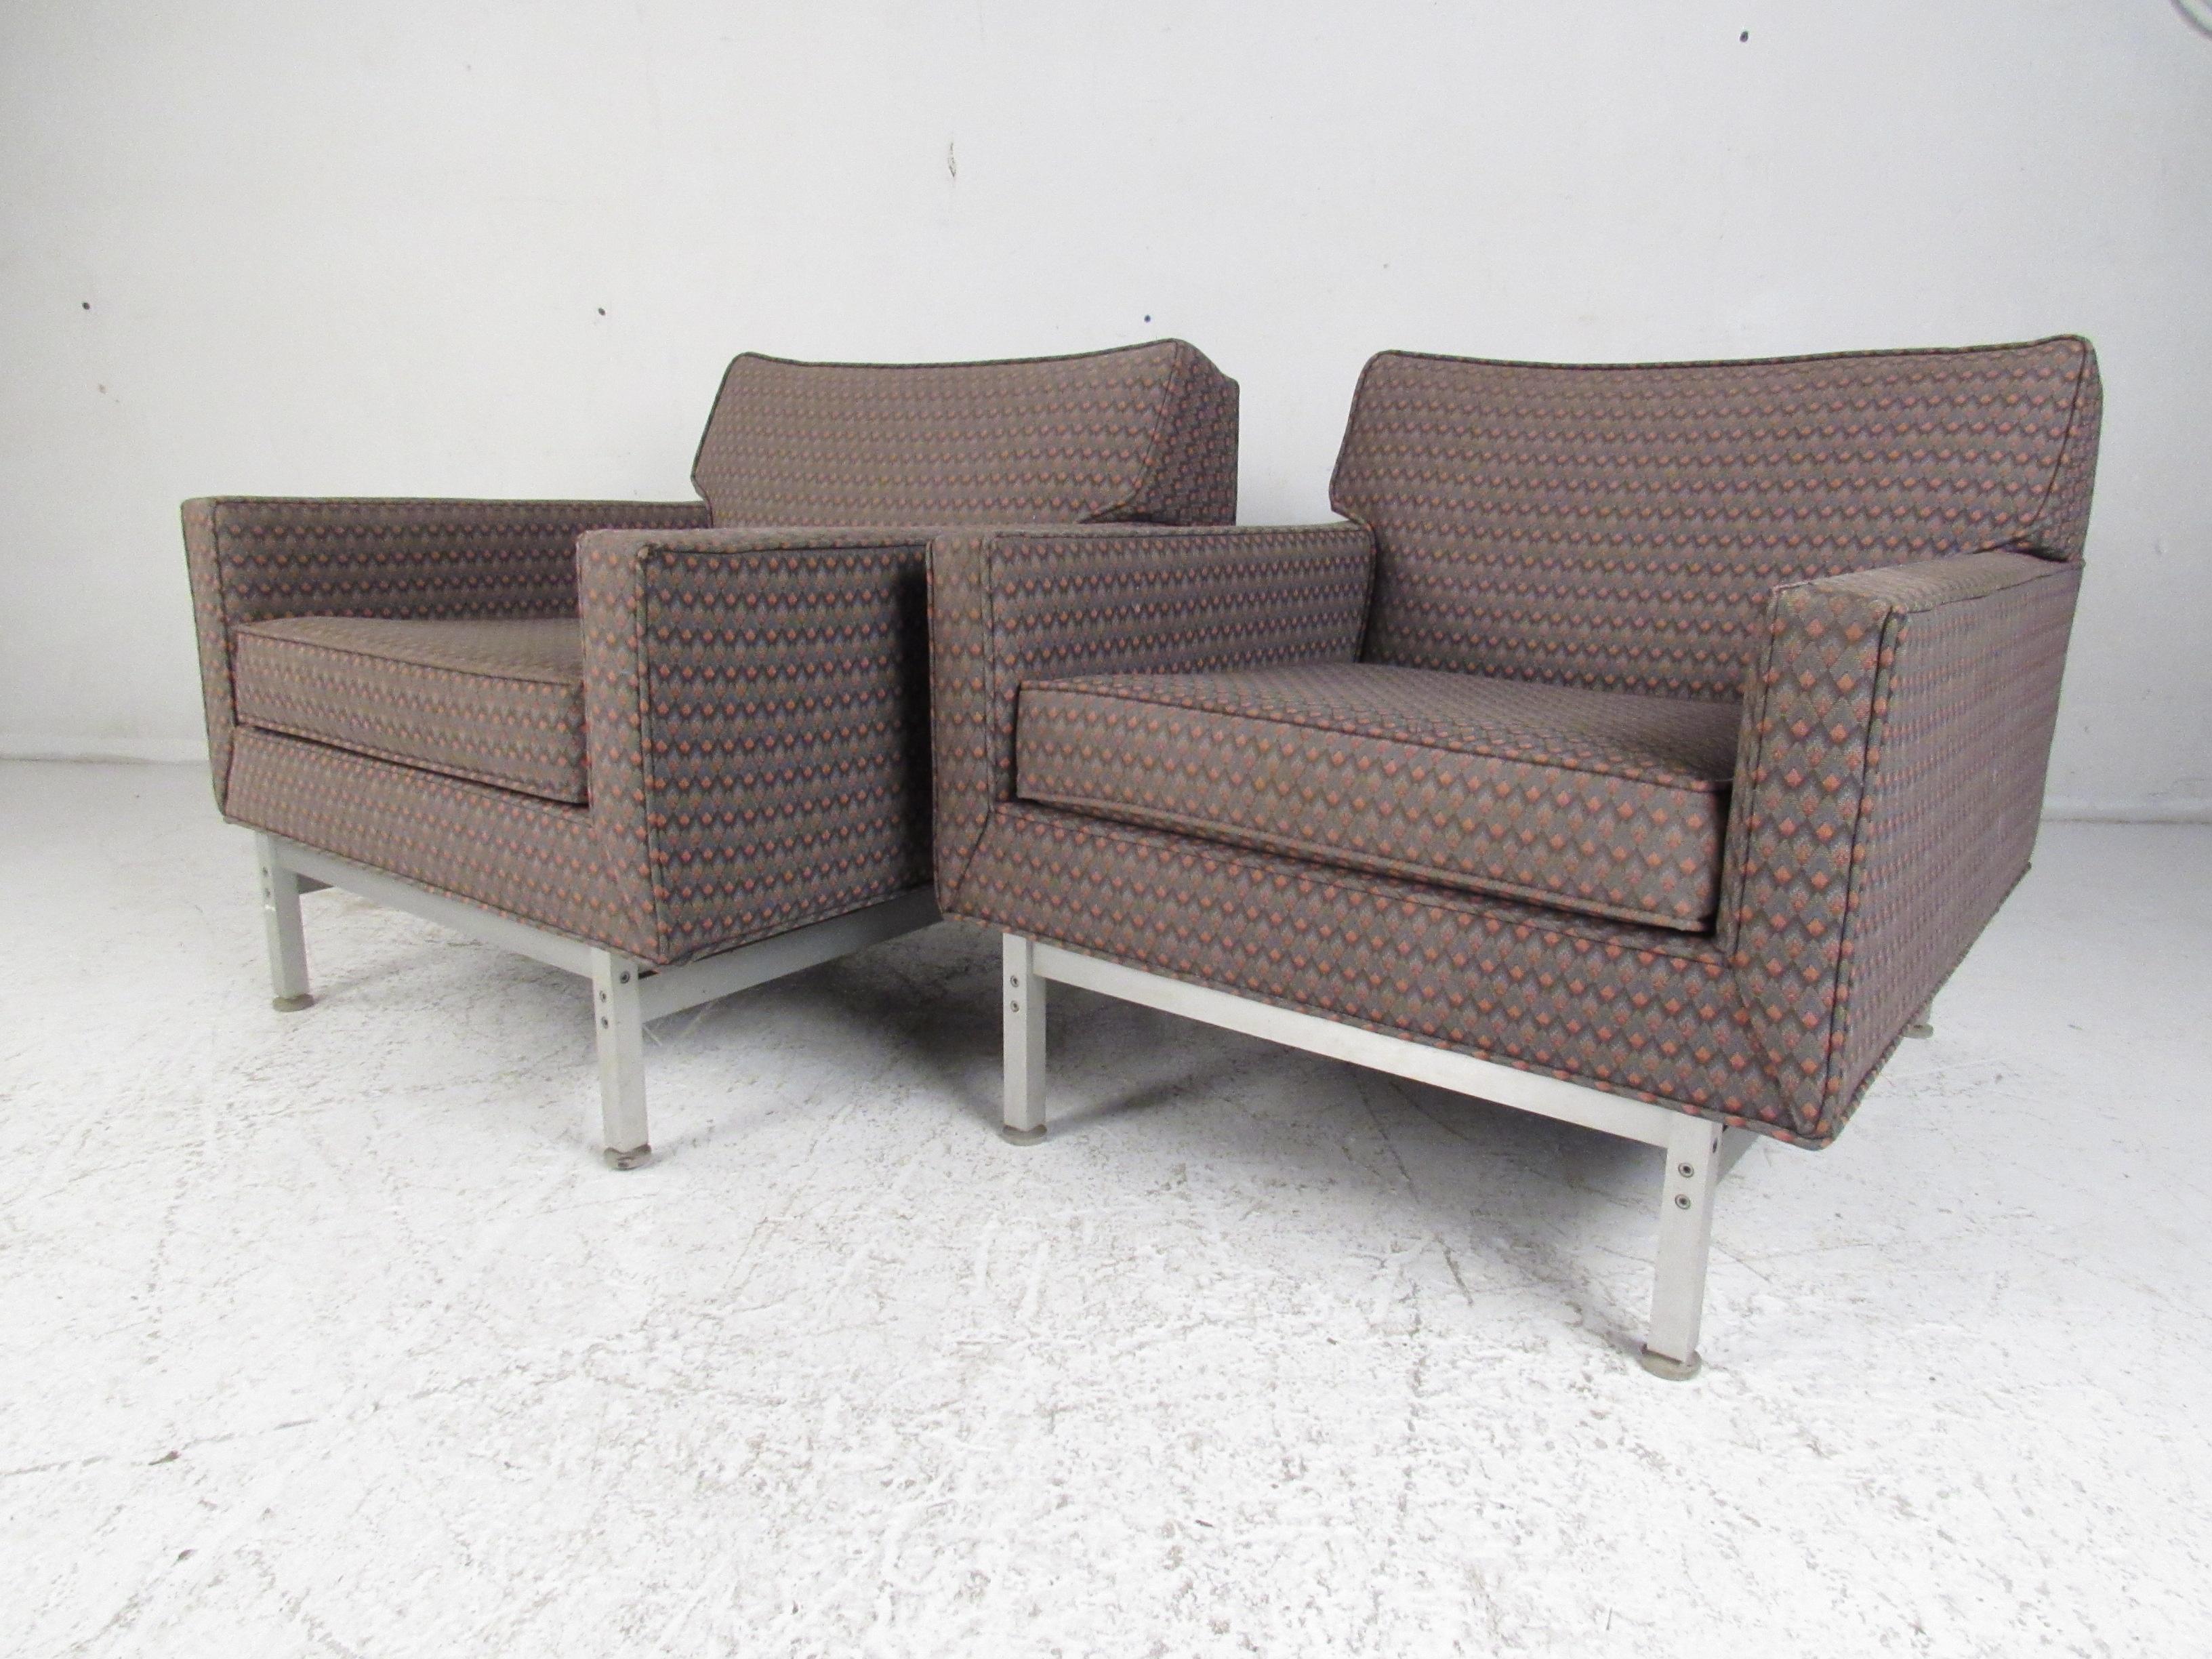 This stylish pair of vintage modern chairs by Knoll International makes the perfect eye catching addition to any modern interior. An extremely comfortable design with low arm rests and an overstuffed removable cushion. This low sitting pair of